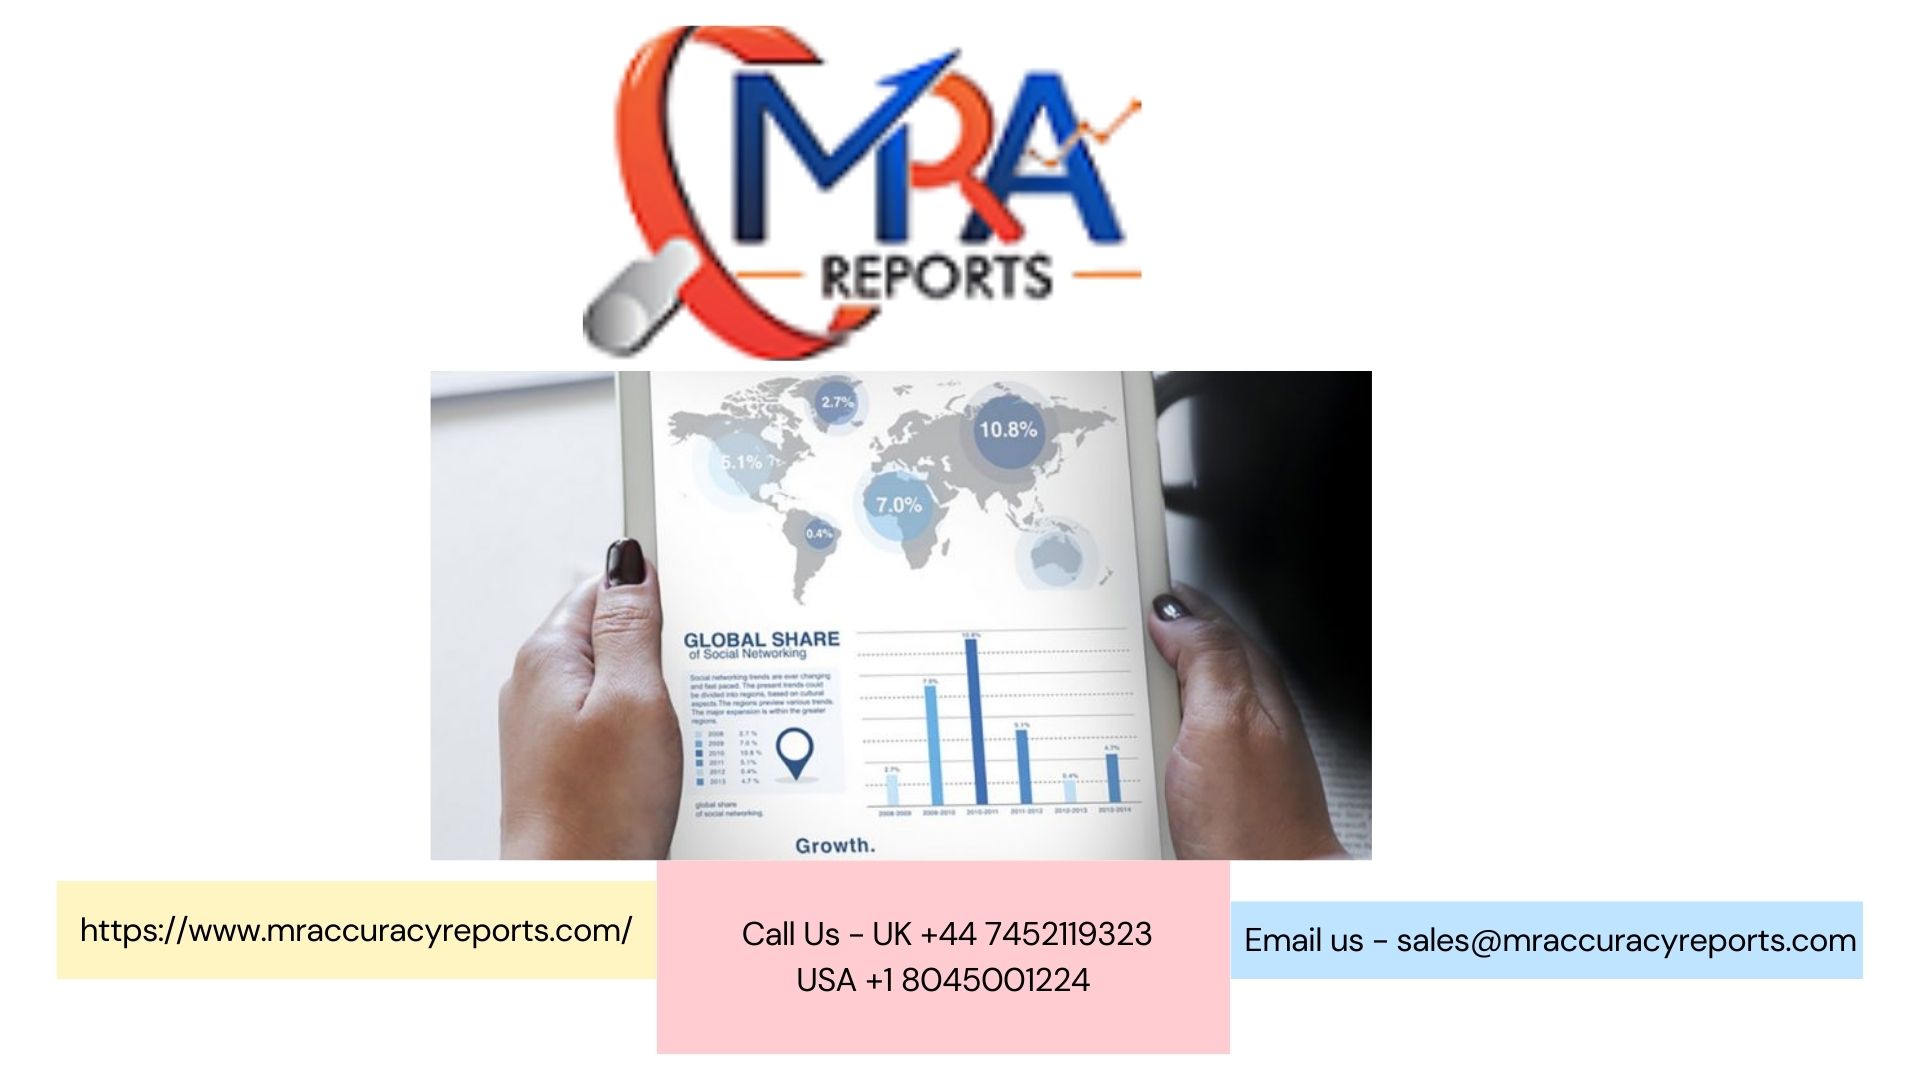 Microscopic Polyangiitis (MPA) Treatment Market Upcoming Trends, Segmented by Type, Application, End-User and Region -Celltrion In – Scene for Dummies: Everything Hollywood Undead